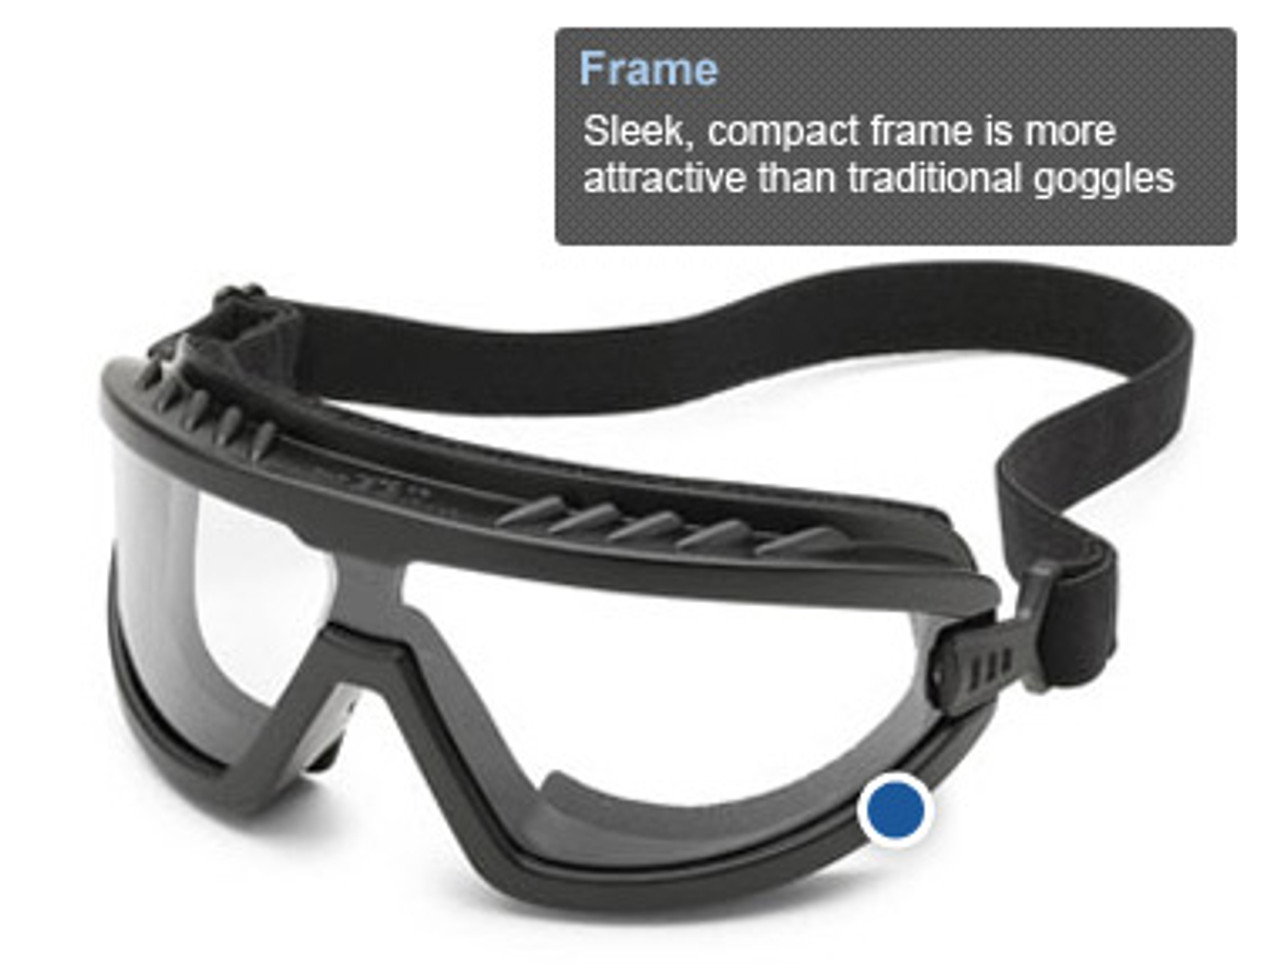 Contemporary goggle protection for those who like to work hard, Wheelz is lightweight and stylish.